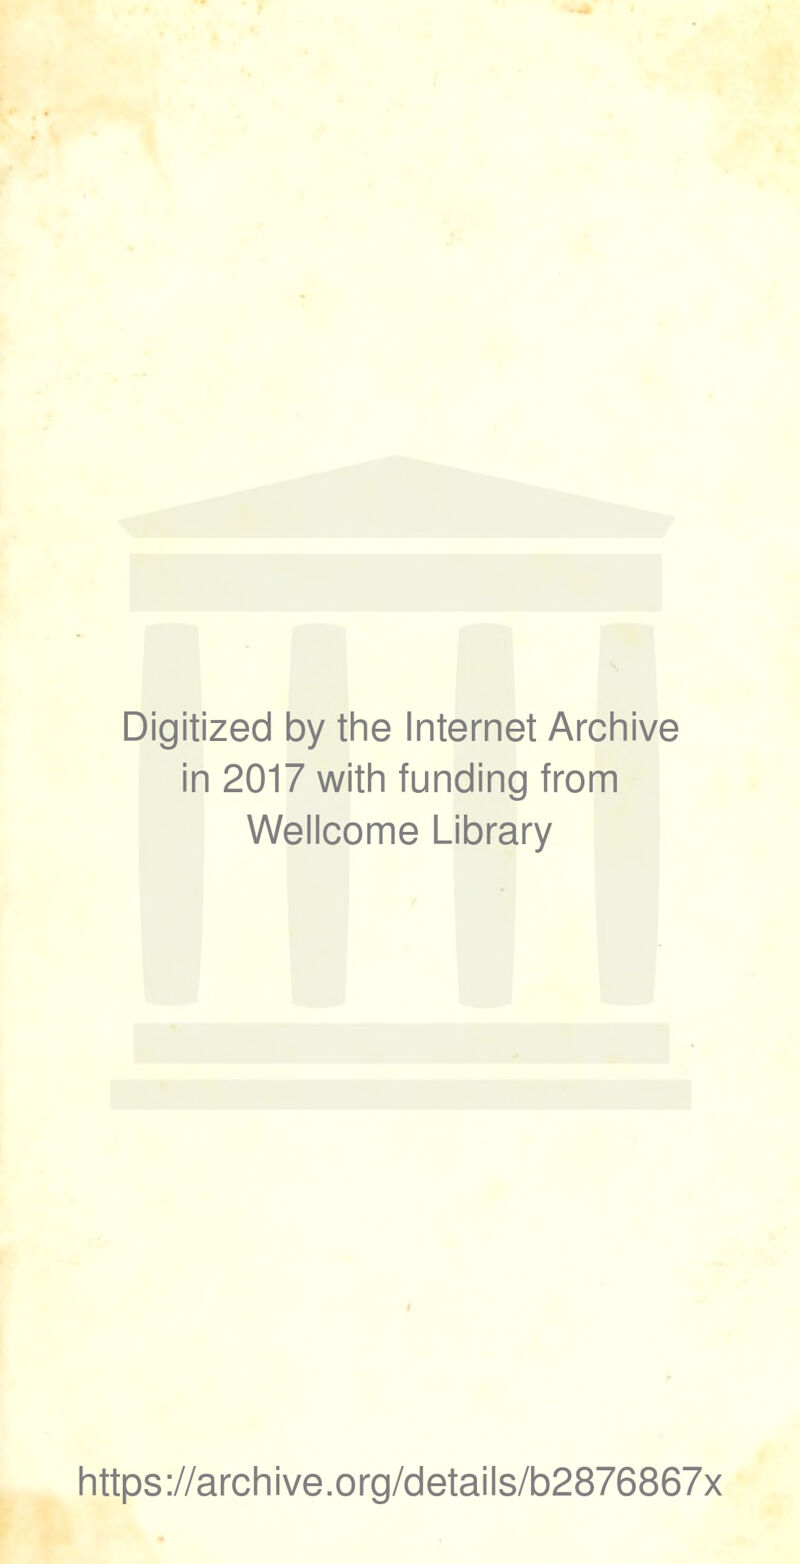 Digitized by the Internet Archive in 2017 with funding from Wellcome Library https://archive.org/details/b2876867x